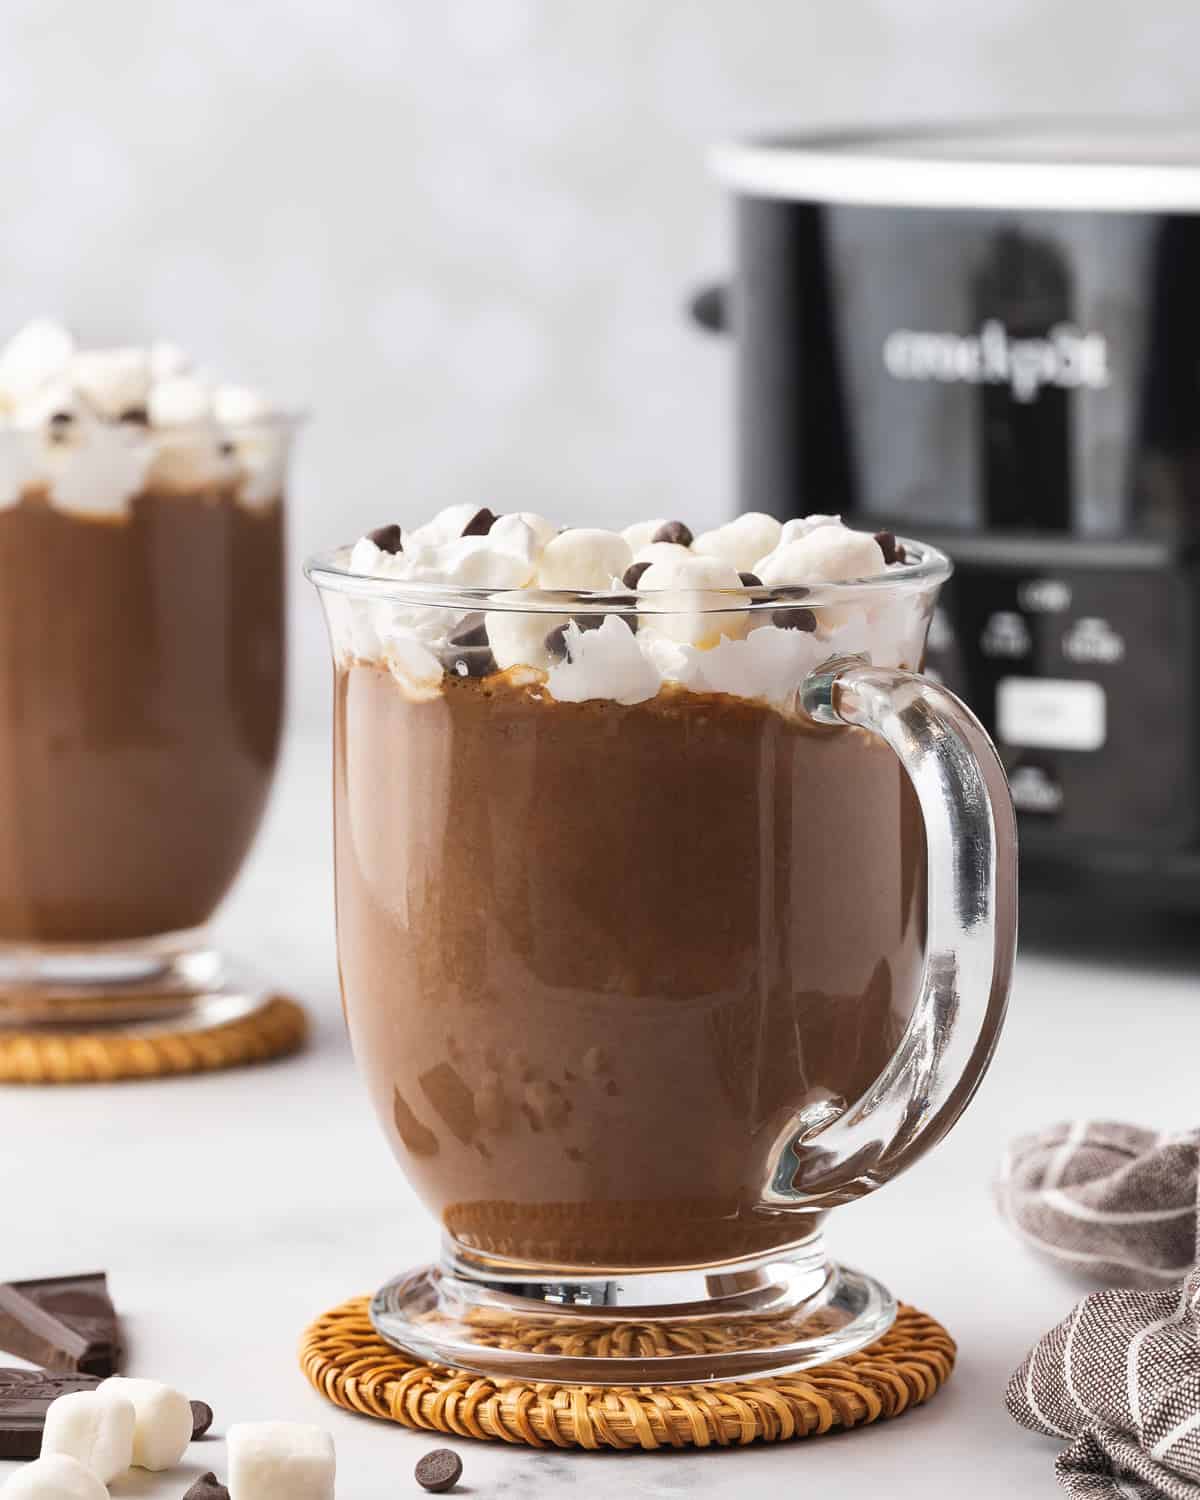 A mug of crockpot hot chocolate with whipped cream, marshmallows, and chocolate chips.